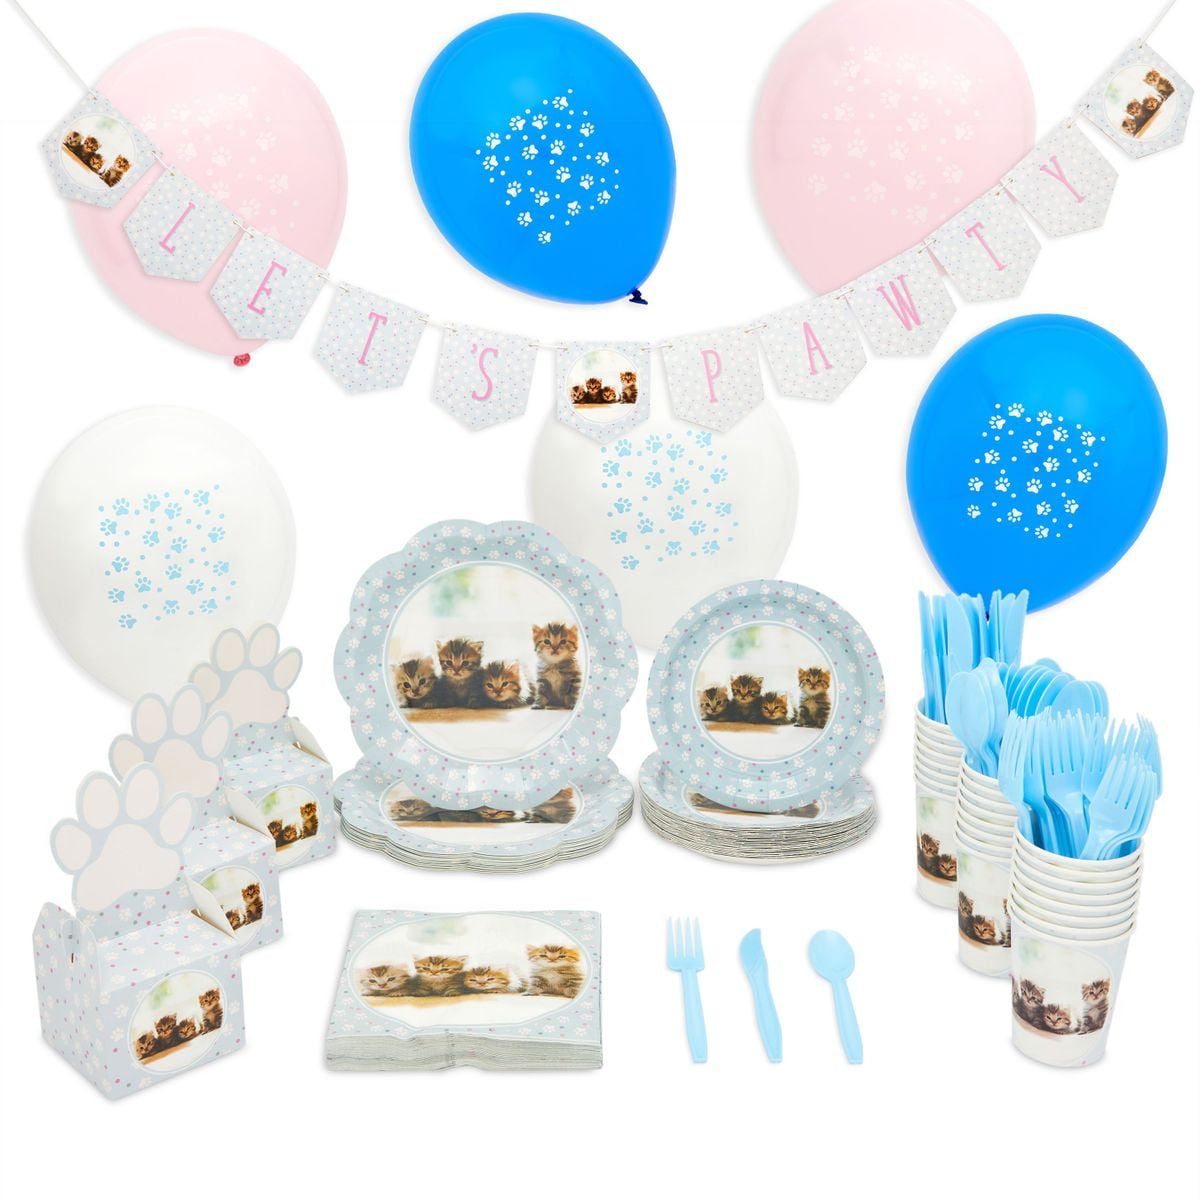 Details about   Bluey and Bingo themed party supplies decorations ~ cups plates napkins table 